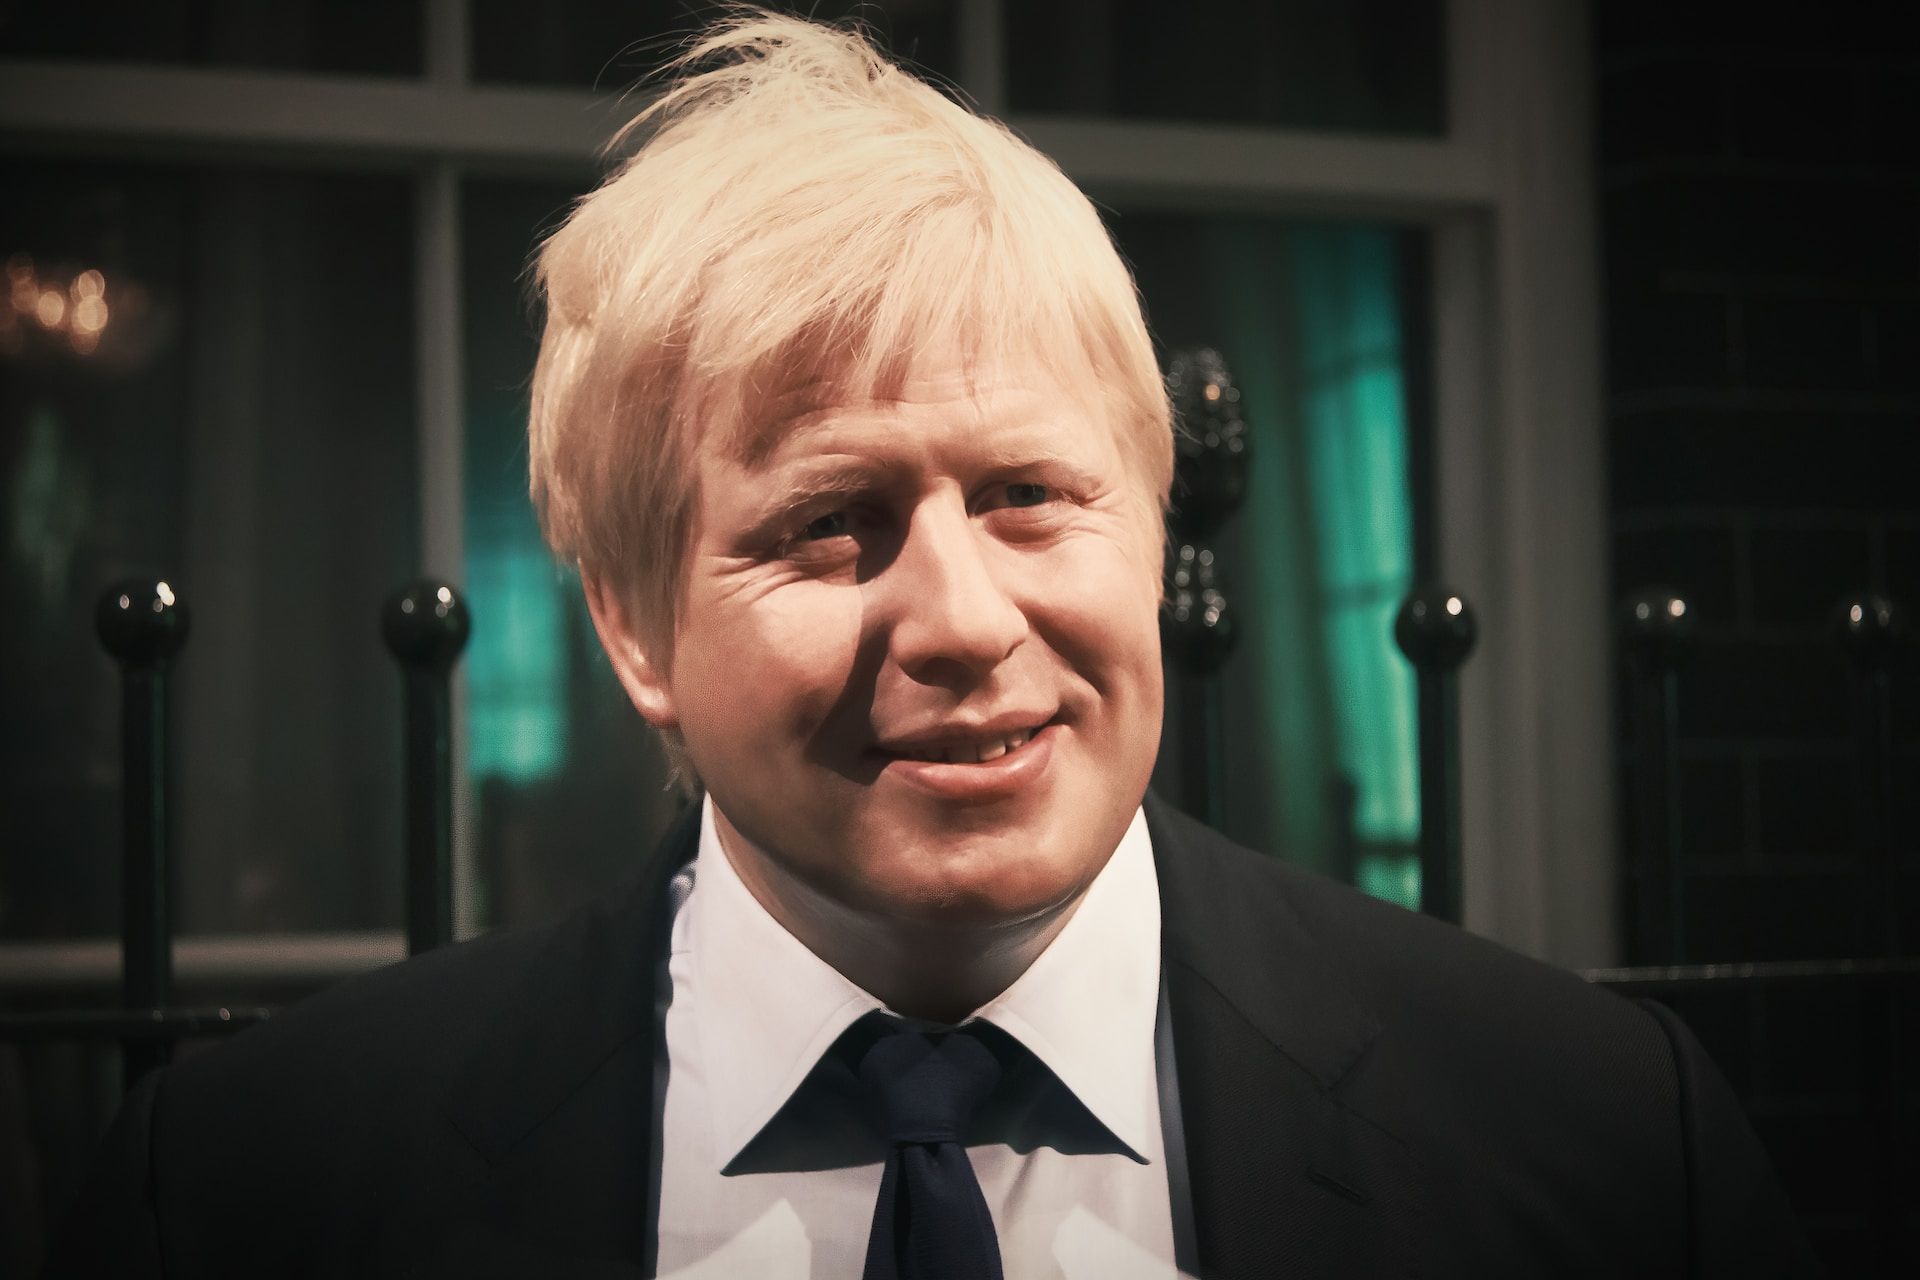 Wax sculpture of Boris Johnson displayed at the Madame Tussauds Museum in London